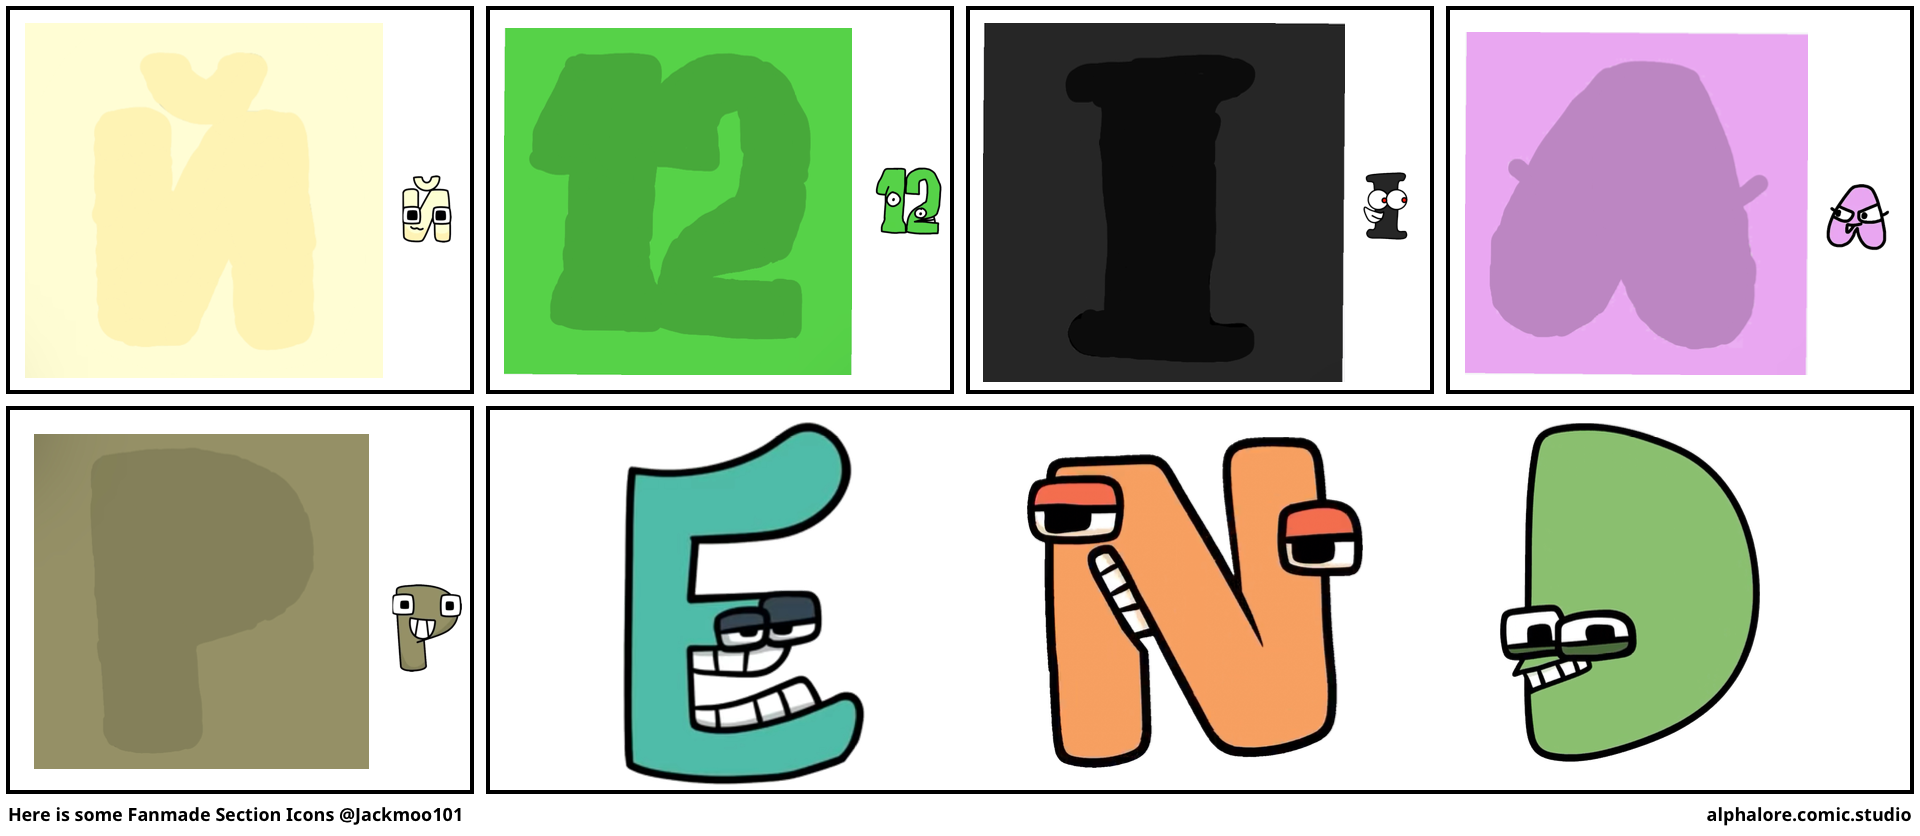 Here is some Fanmade Section Icons @Jackmoo101